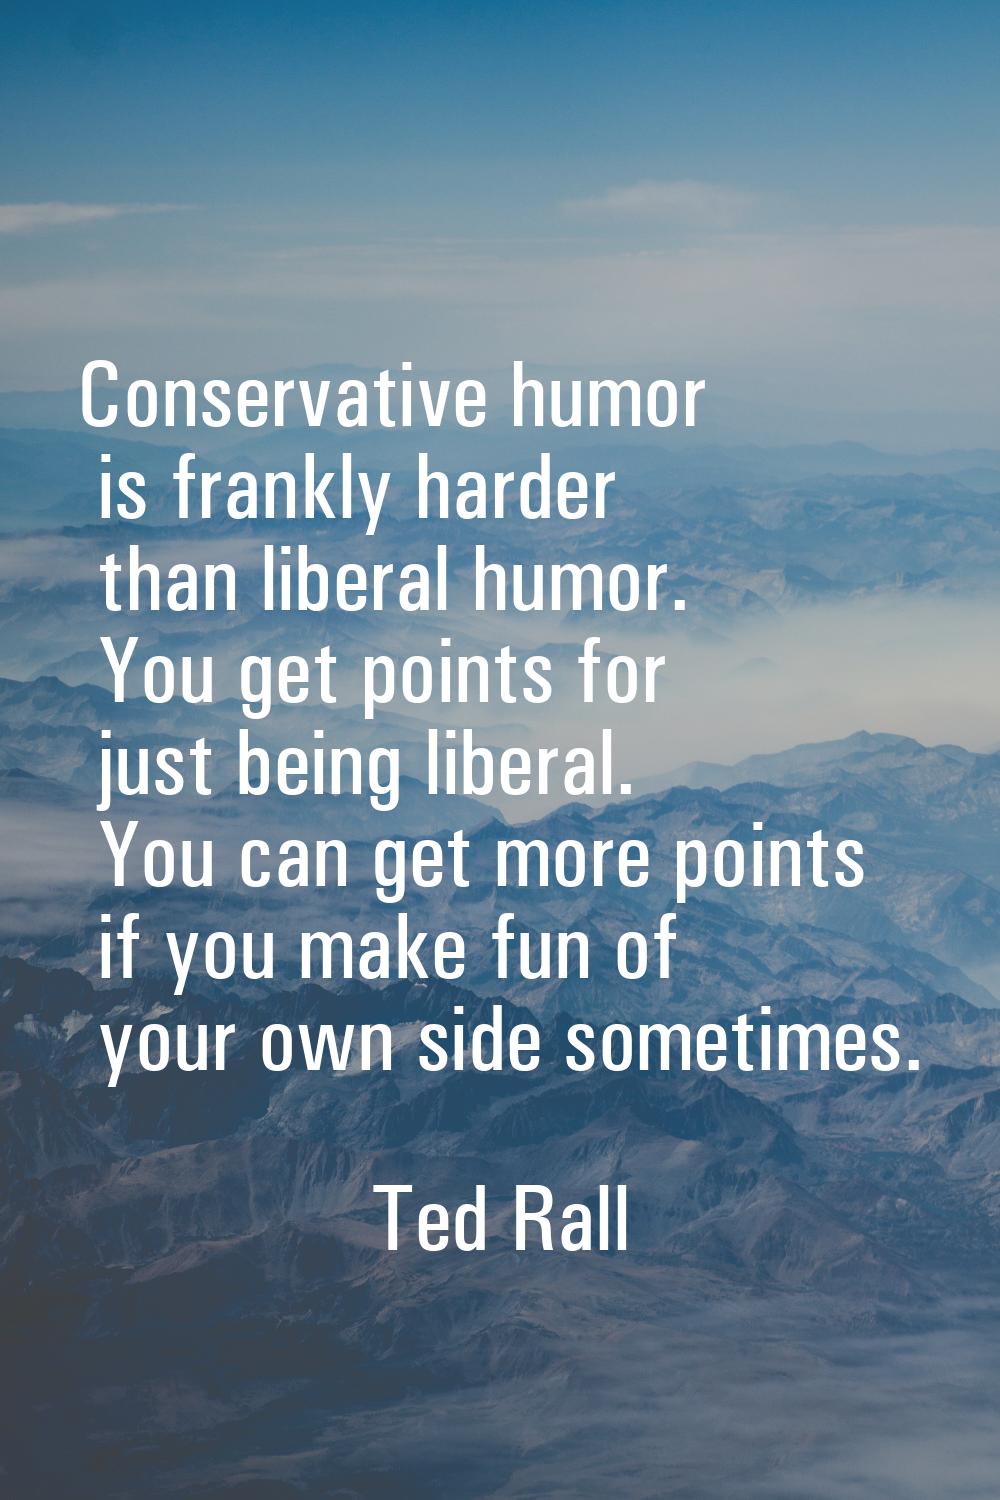 Conservative humor is frankly harder than liberal humor. You get points for just being liberal. You